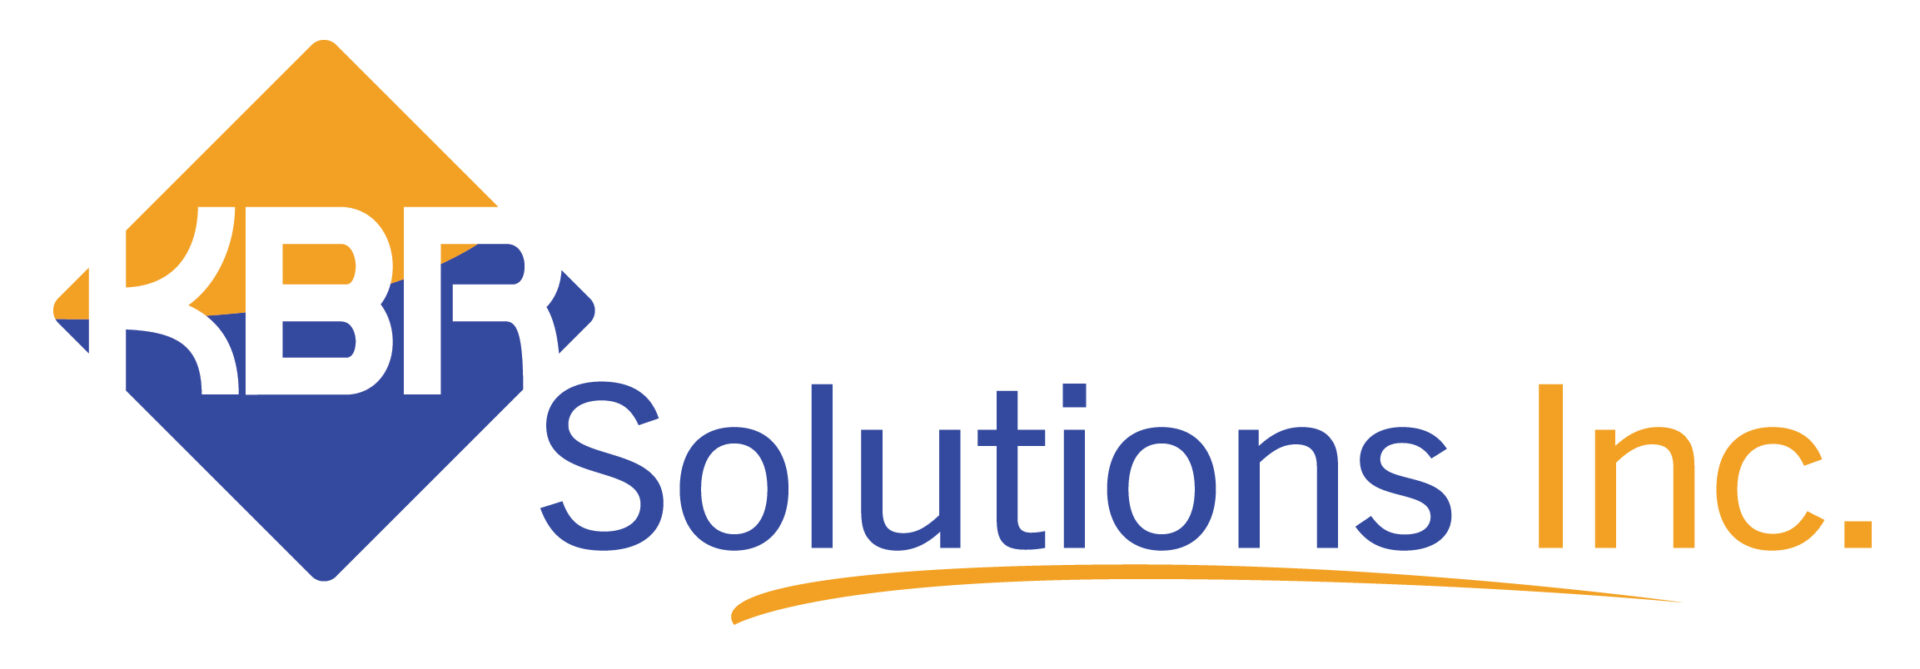 A logo of the company solutions